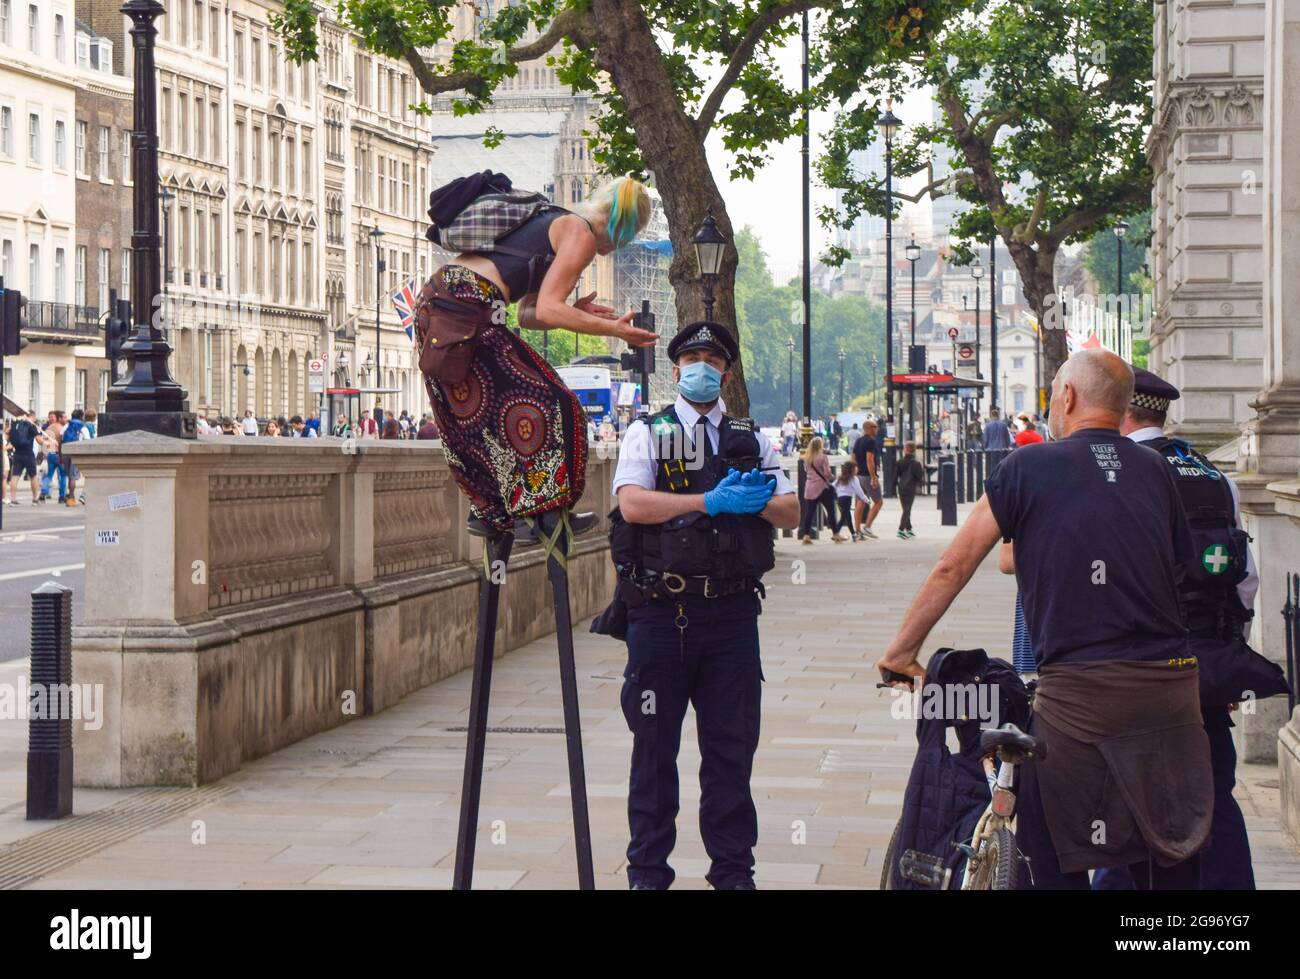 London, United Kingdom. 24th July 2021. A protester on stilts talks to a police officer in Whitehall. Thousands of protesters gathered in Westminster to protest against COVID-19 vaccinations, vaccine passports, and coronavirus restrictions, with many demonstrators calling the pandemic a 'hoax'. (Credit: Vuk Valcic / Alamy Live News) Stock Photo